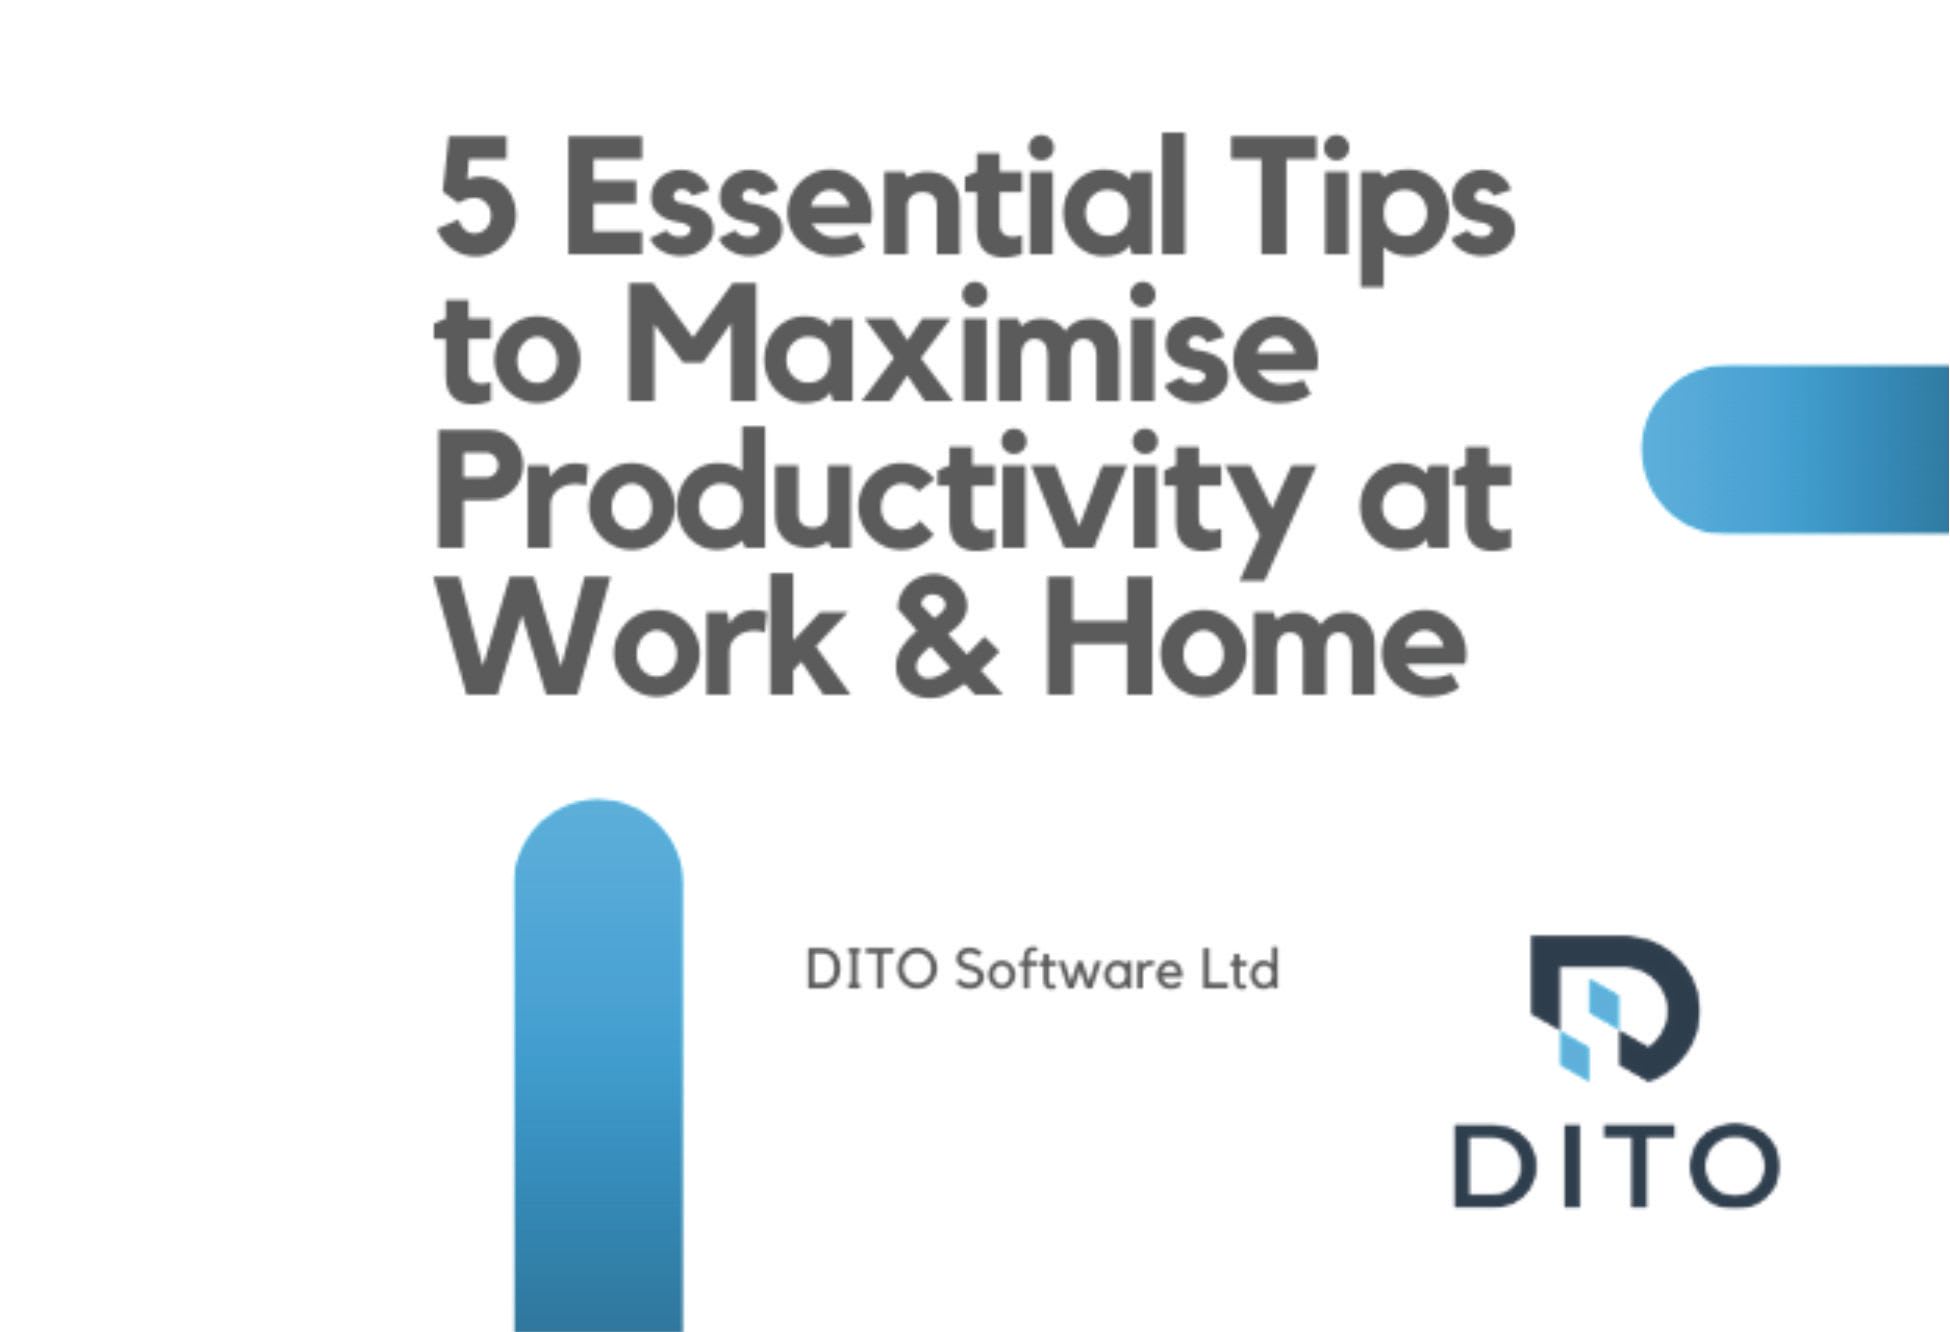 5 Essential Tips to Maximise Productivity at Work & Home